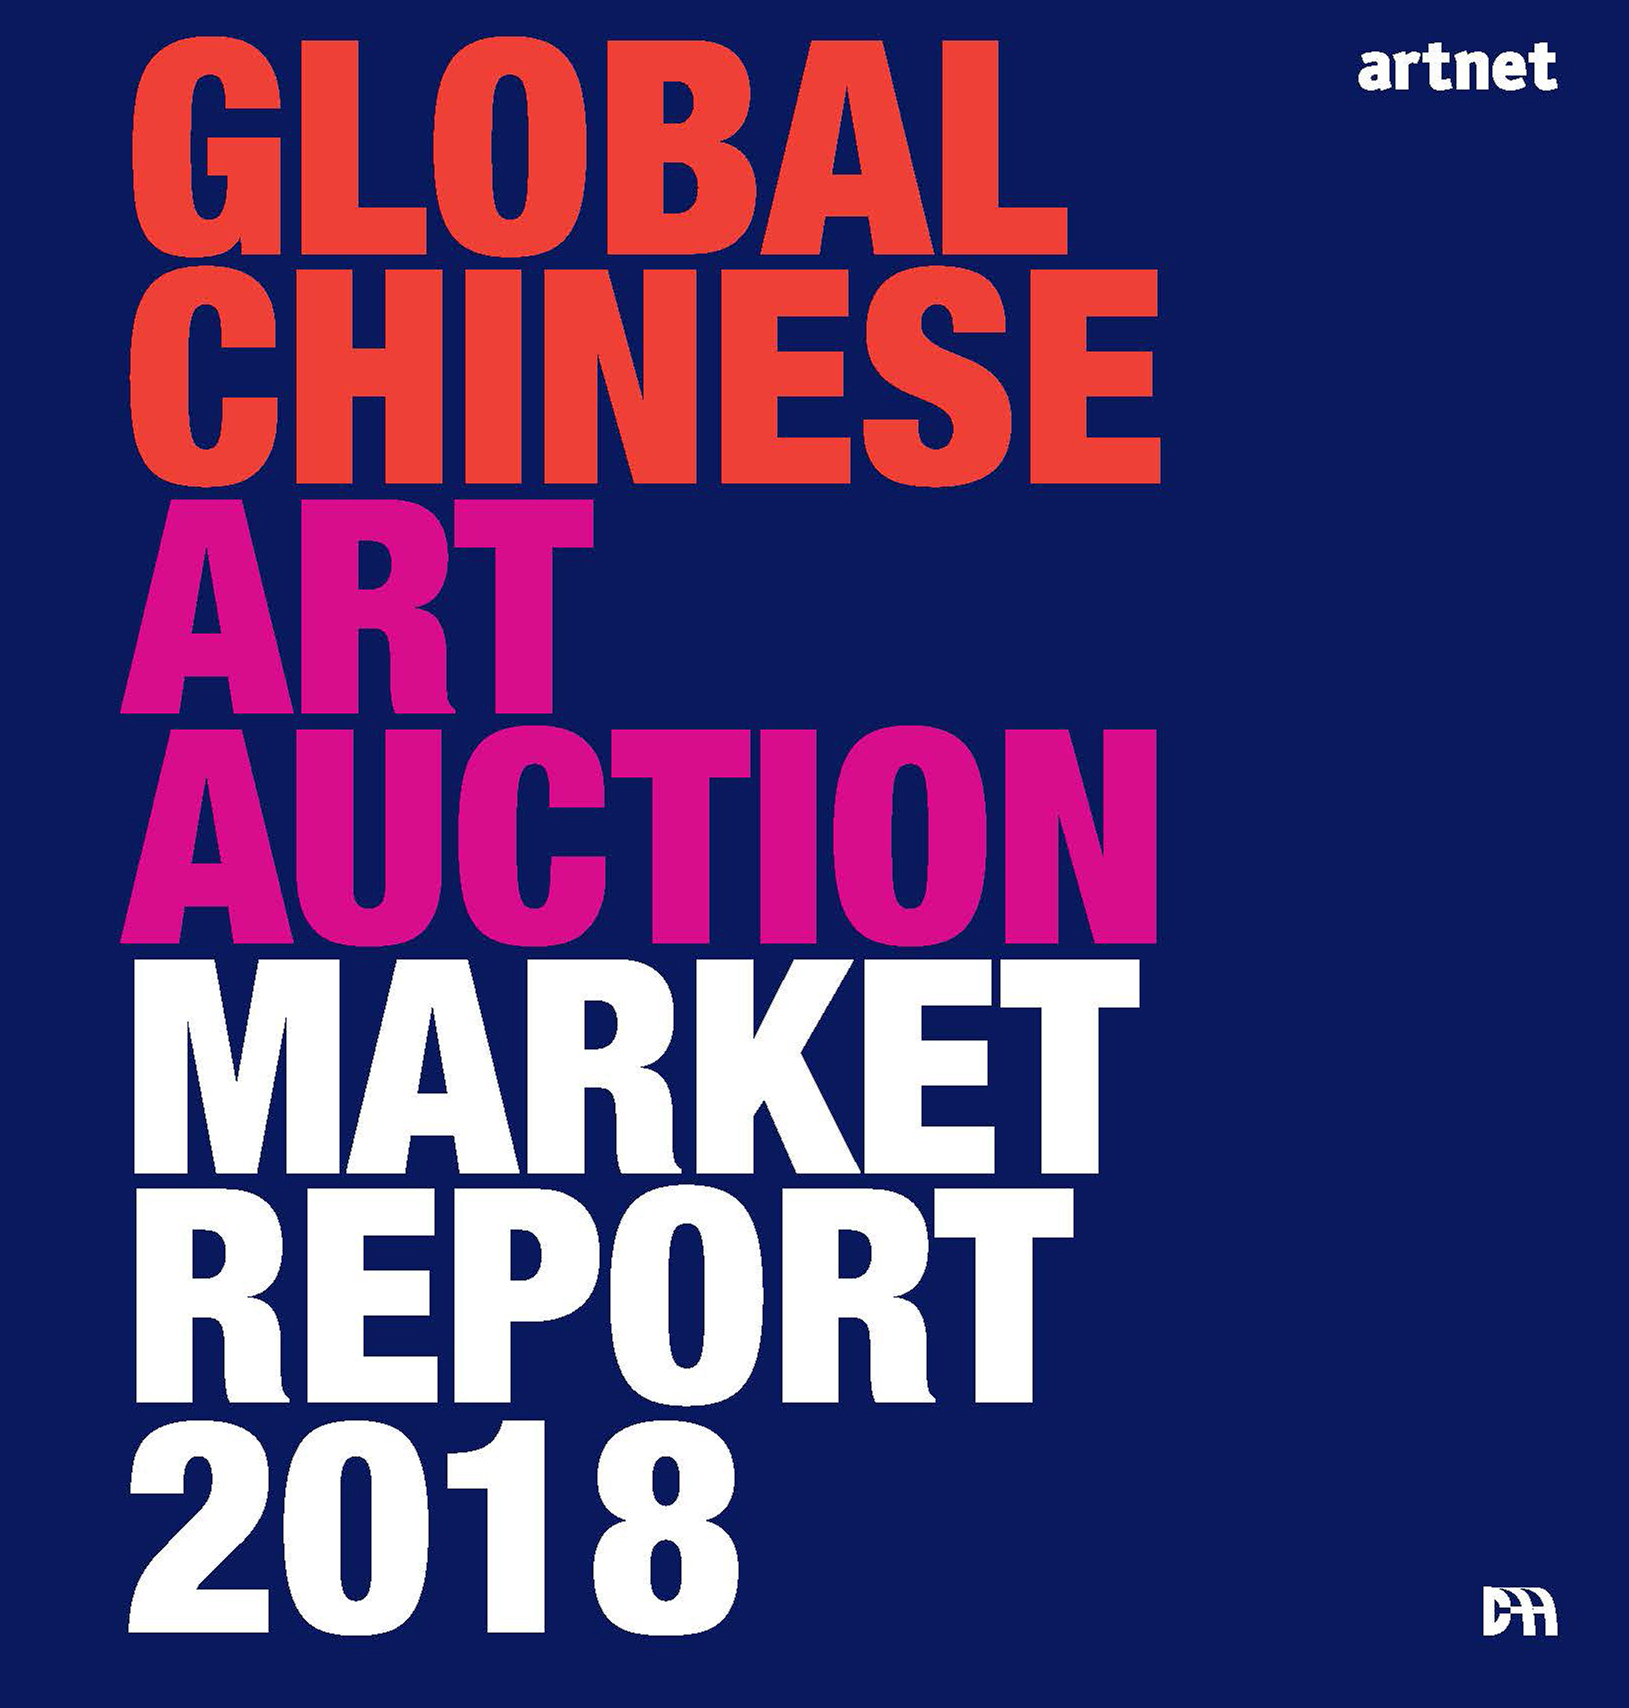 Global Chinese Art Auction Market Report 2018